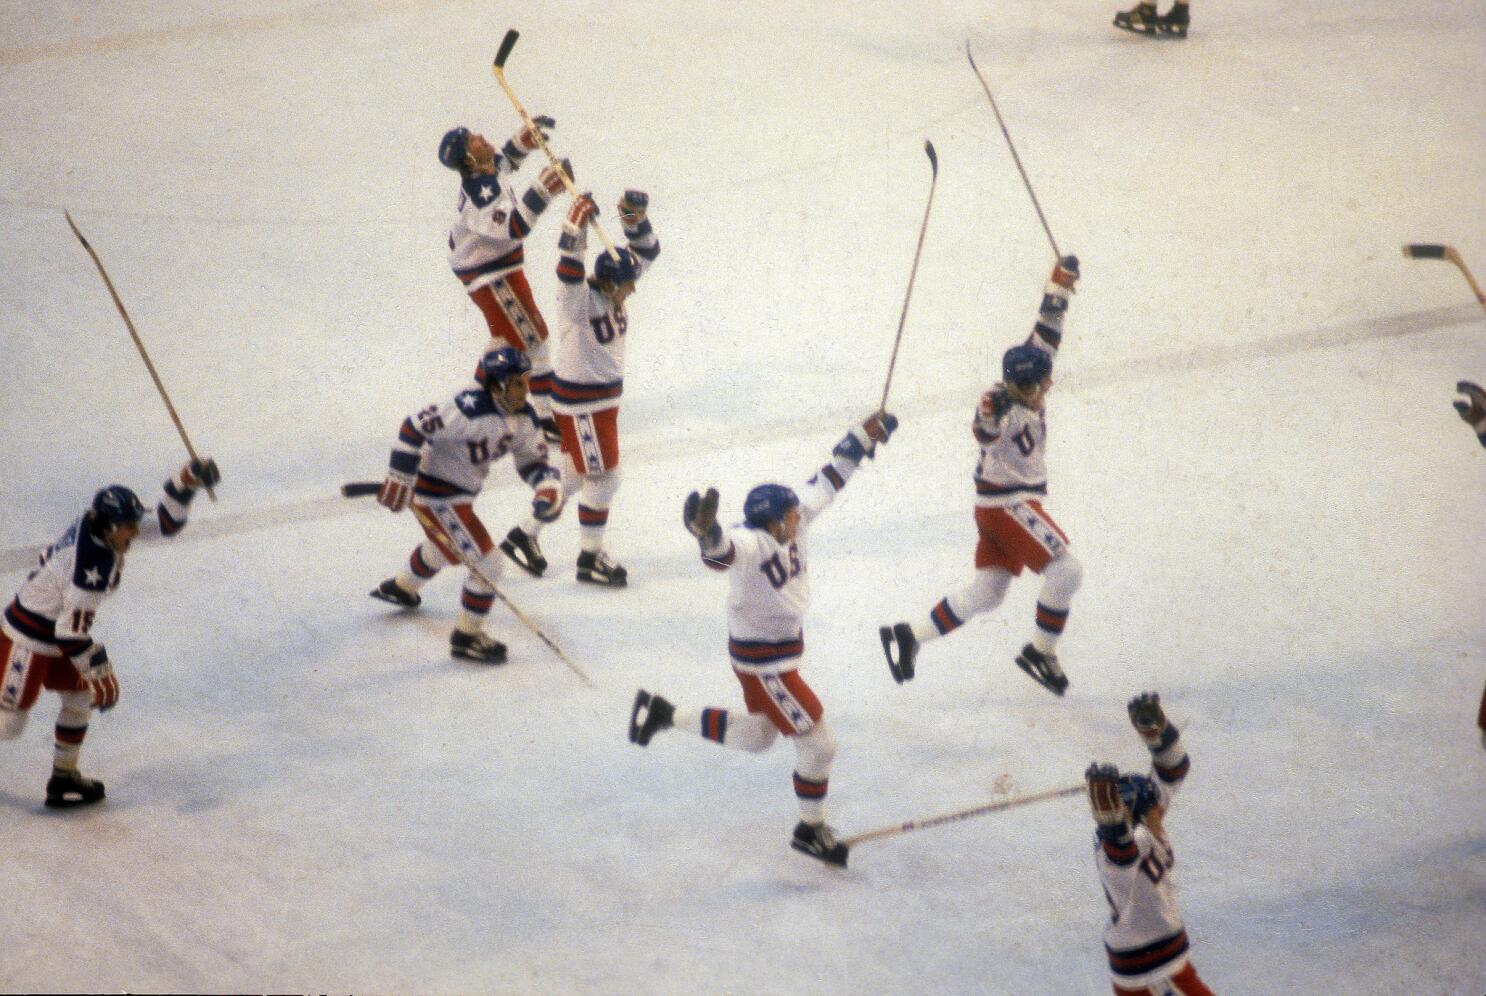 Mask Off: The 1980 US Olympic Hockey Team Has Long Been a Symbol